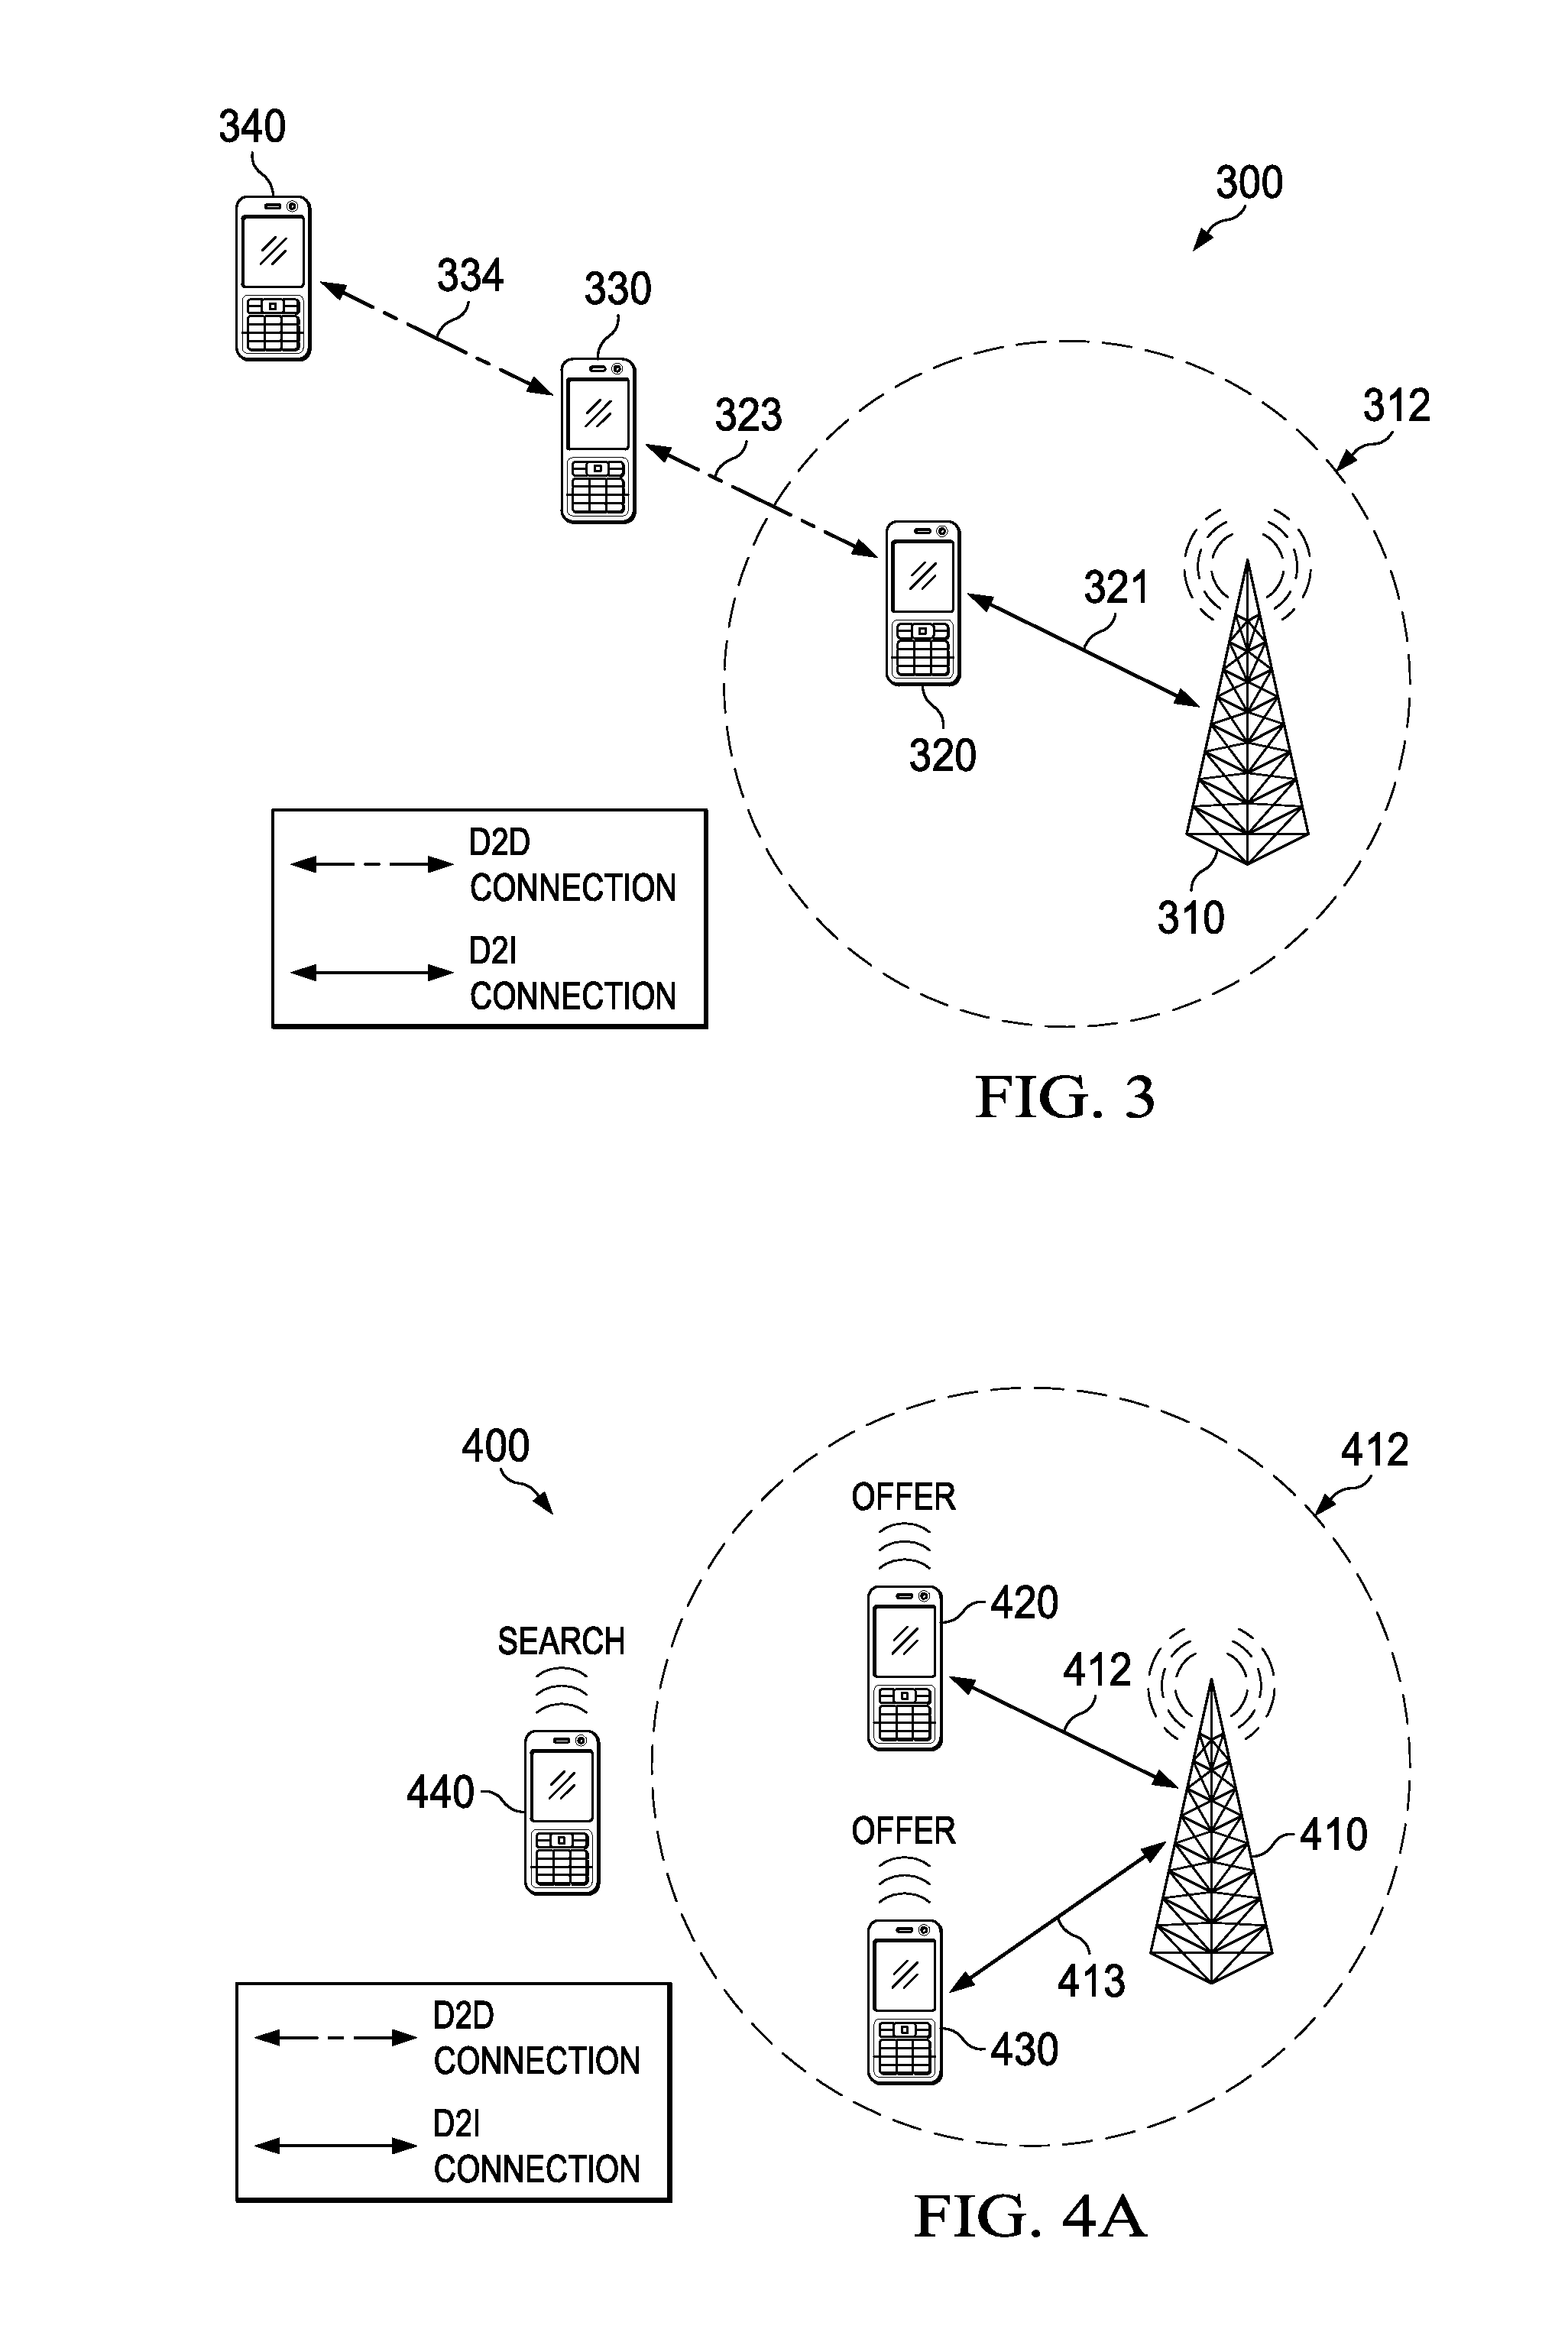 Contention-based Integration of Device to Device (D2D) Networks with Wireless Infrastructure